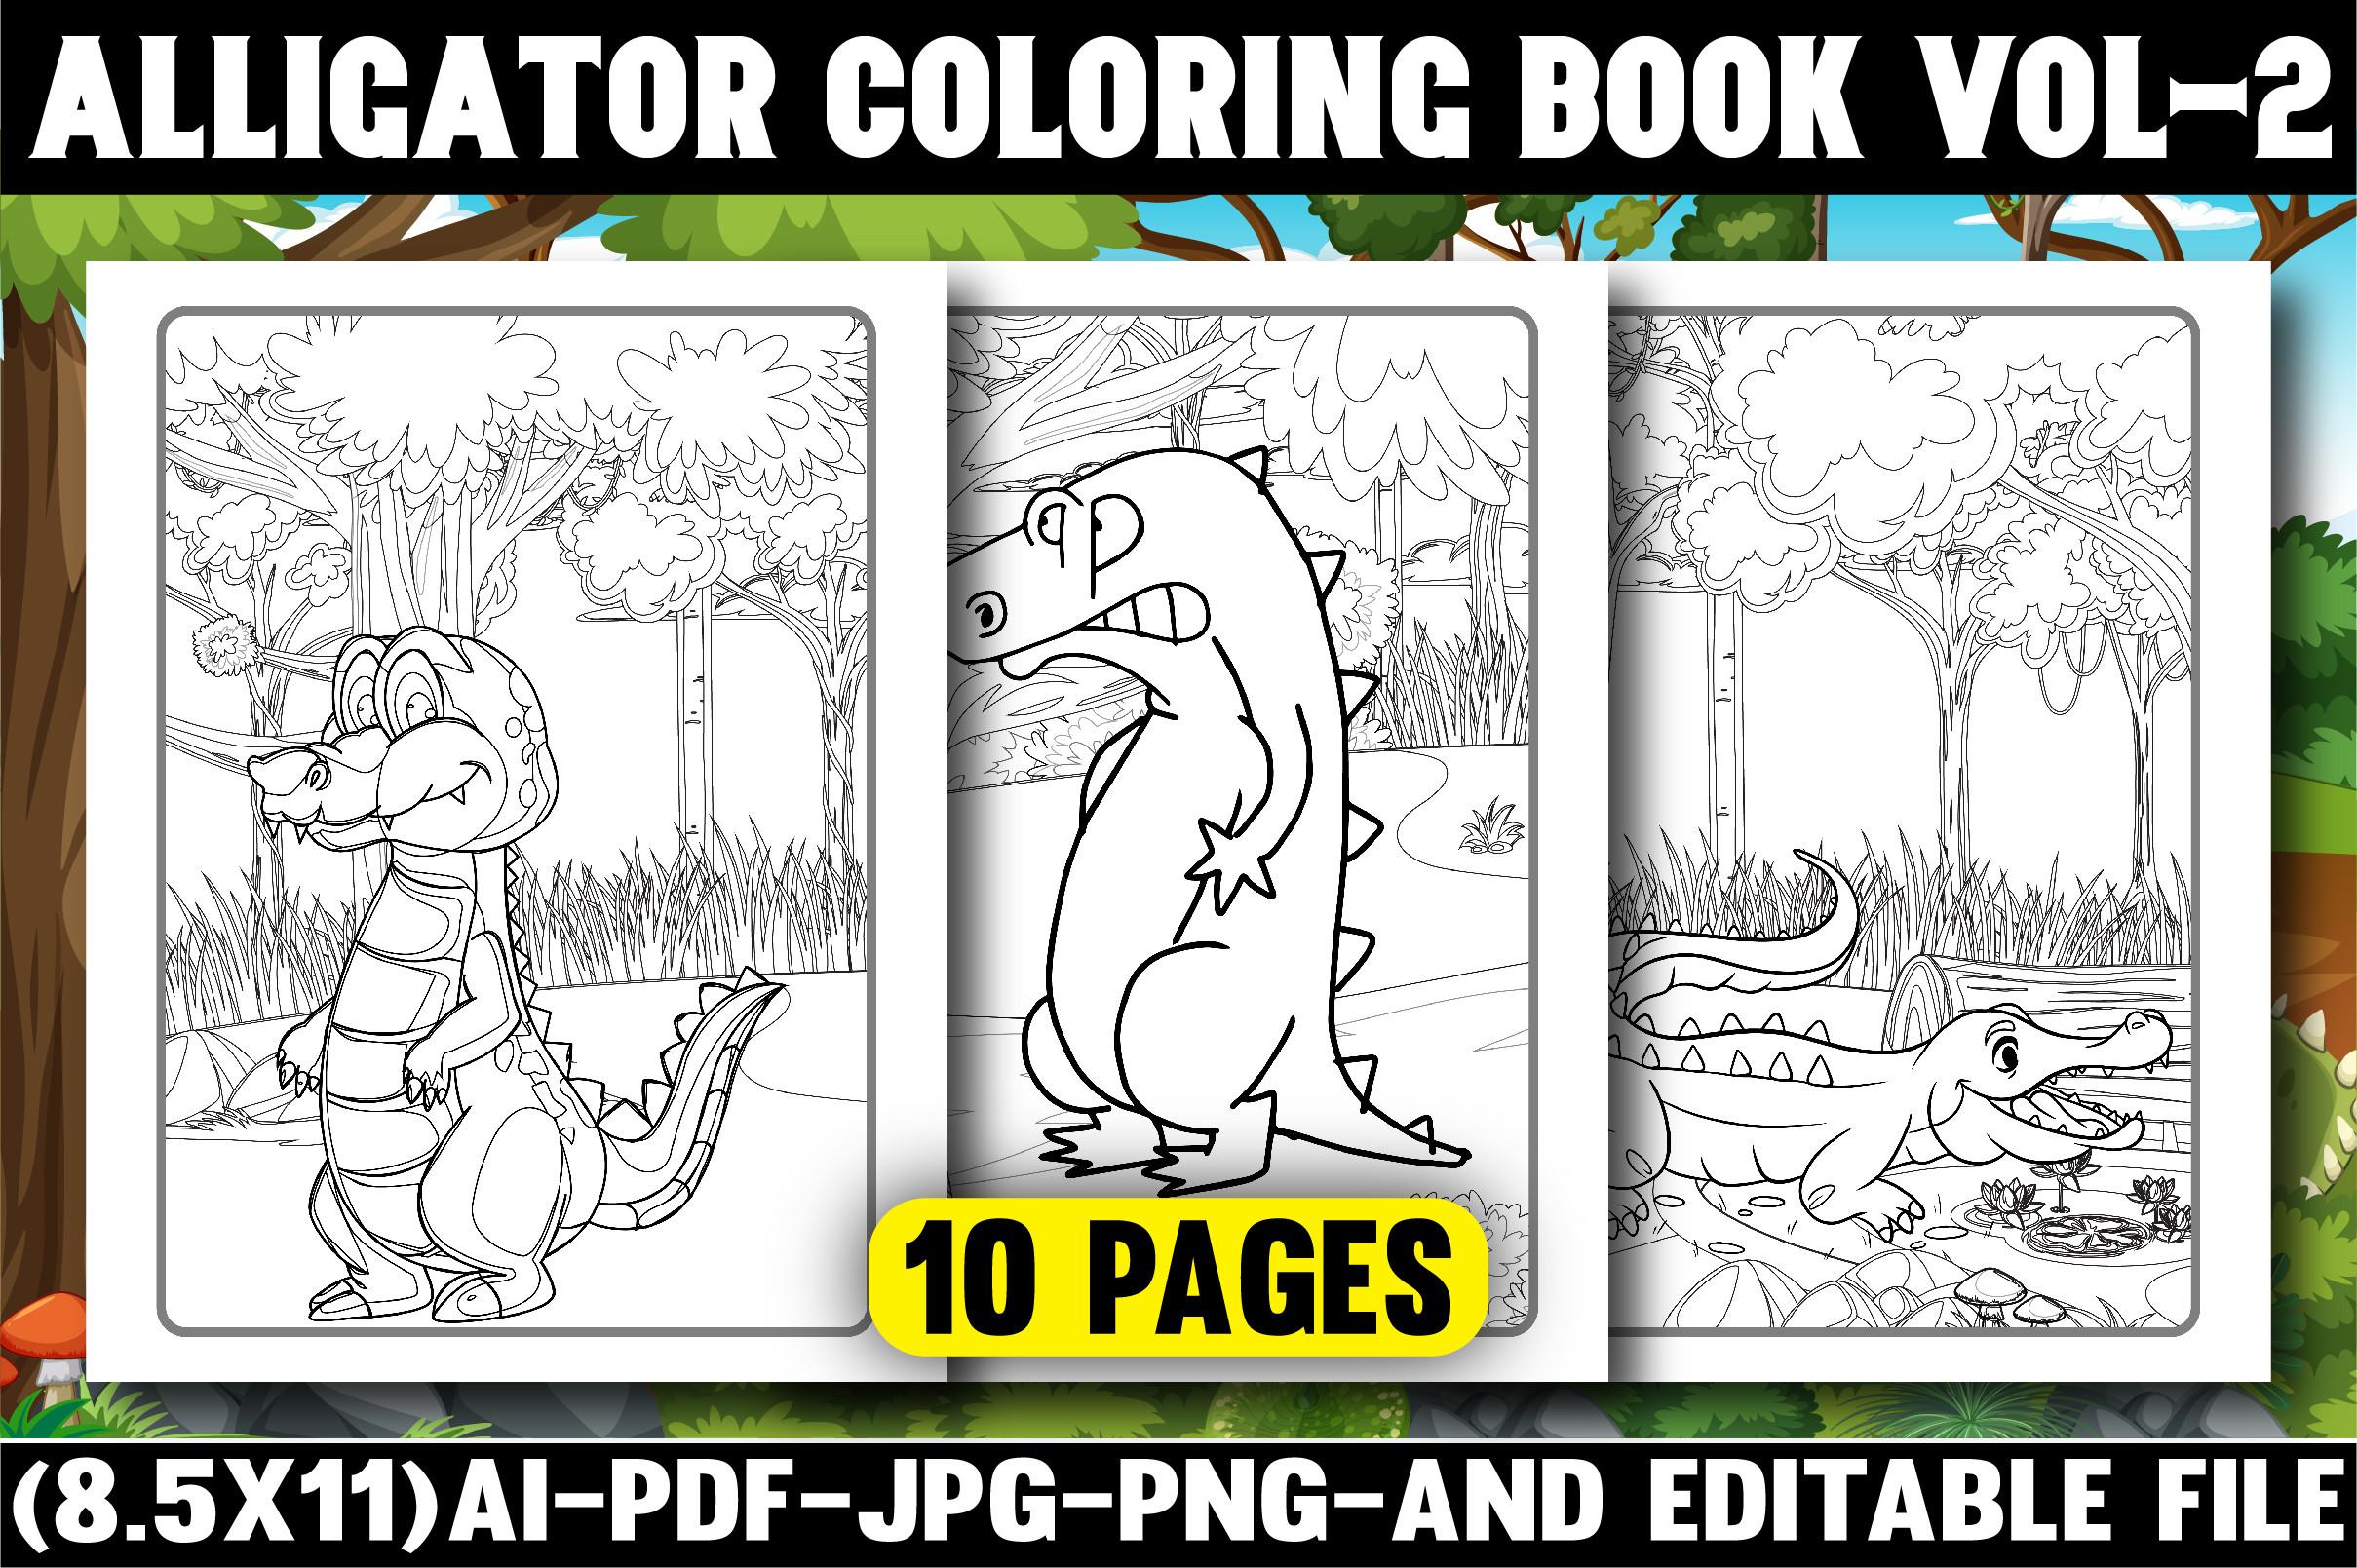 Alligator Coloring Pages for Kids VoL-2